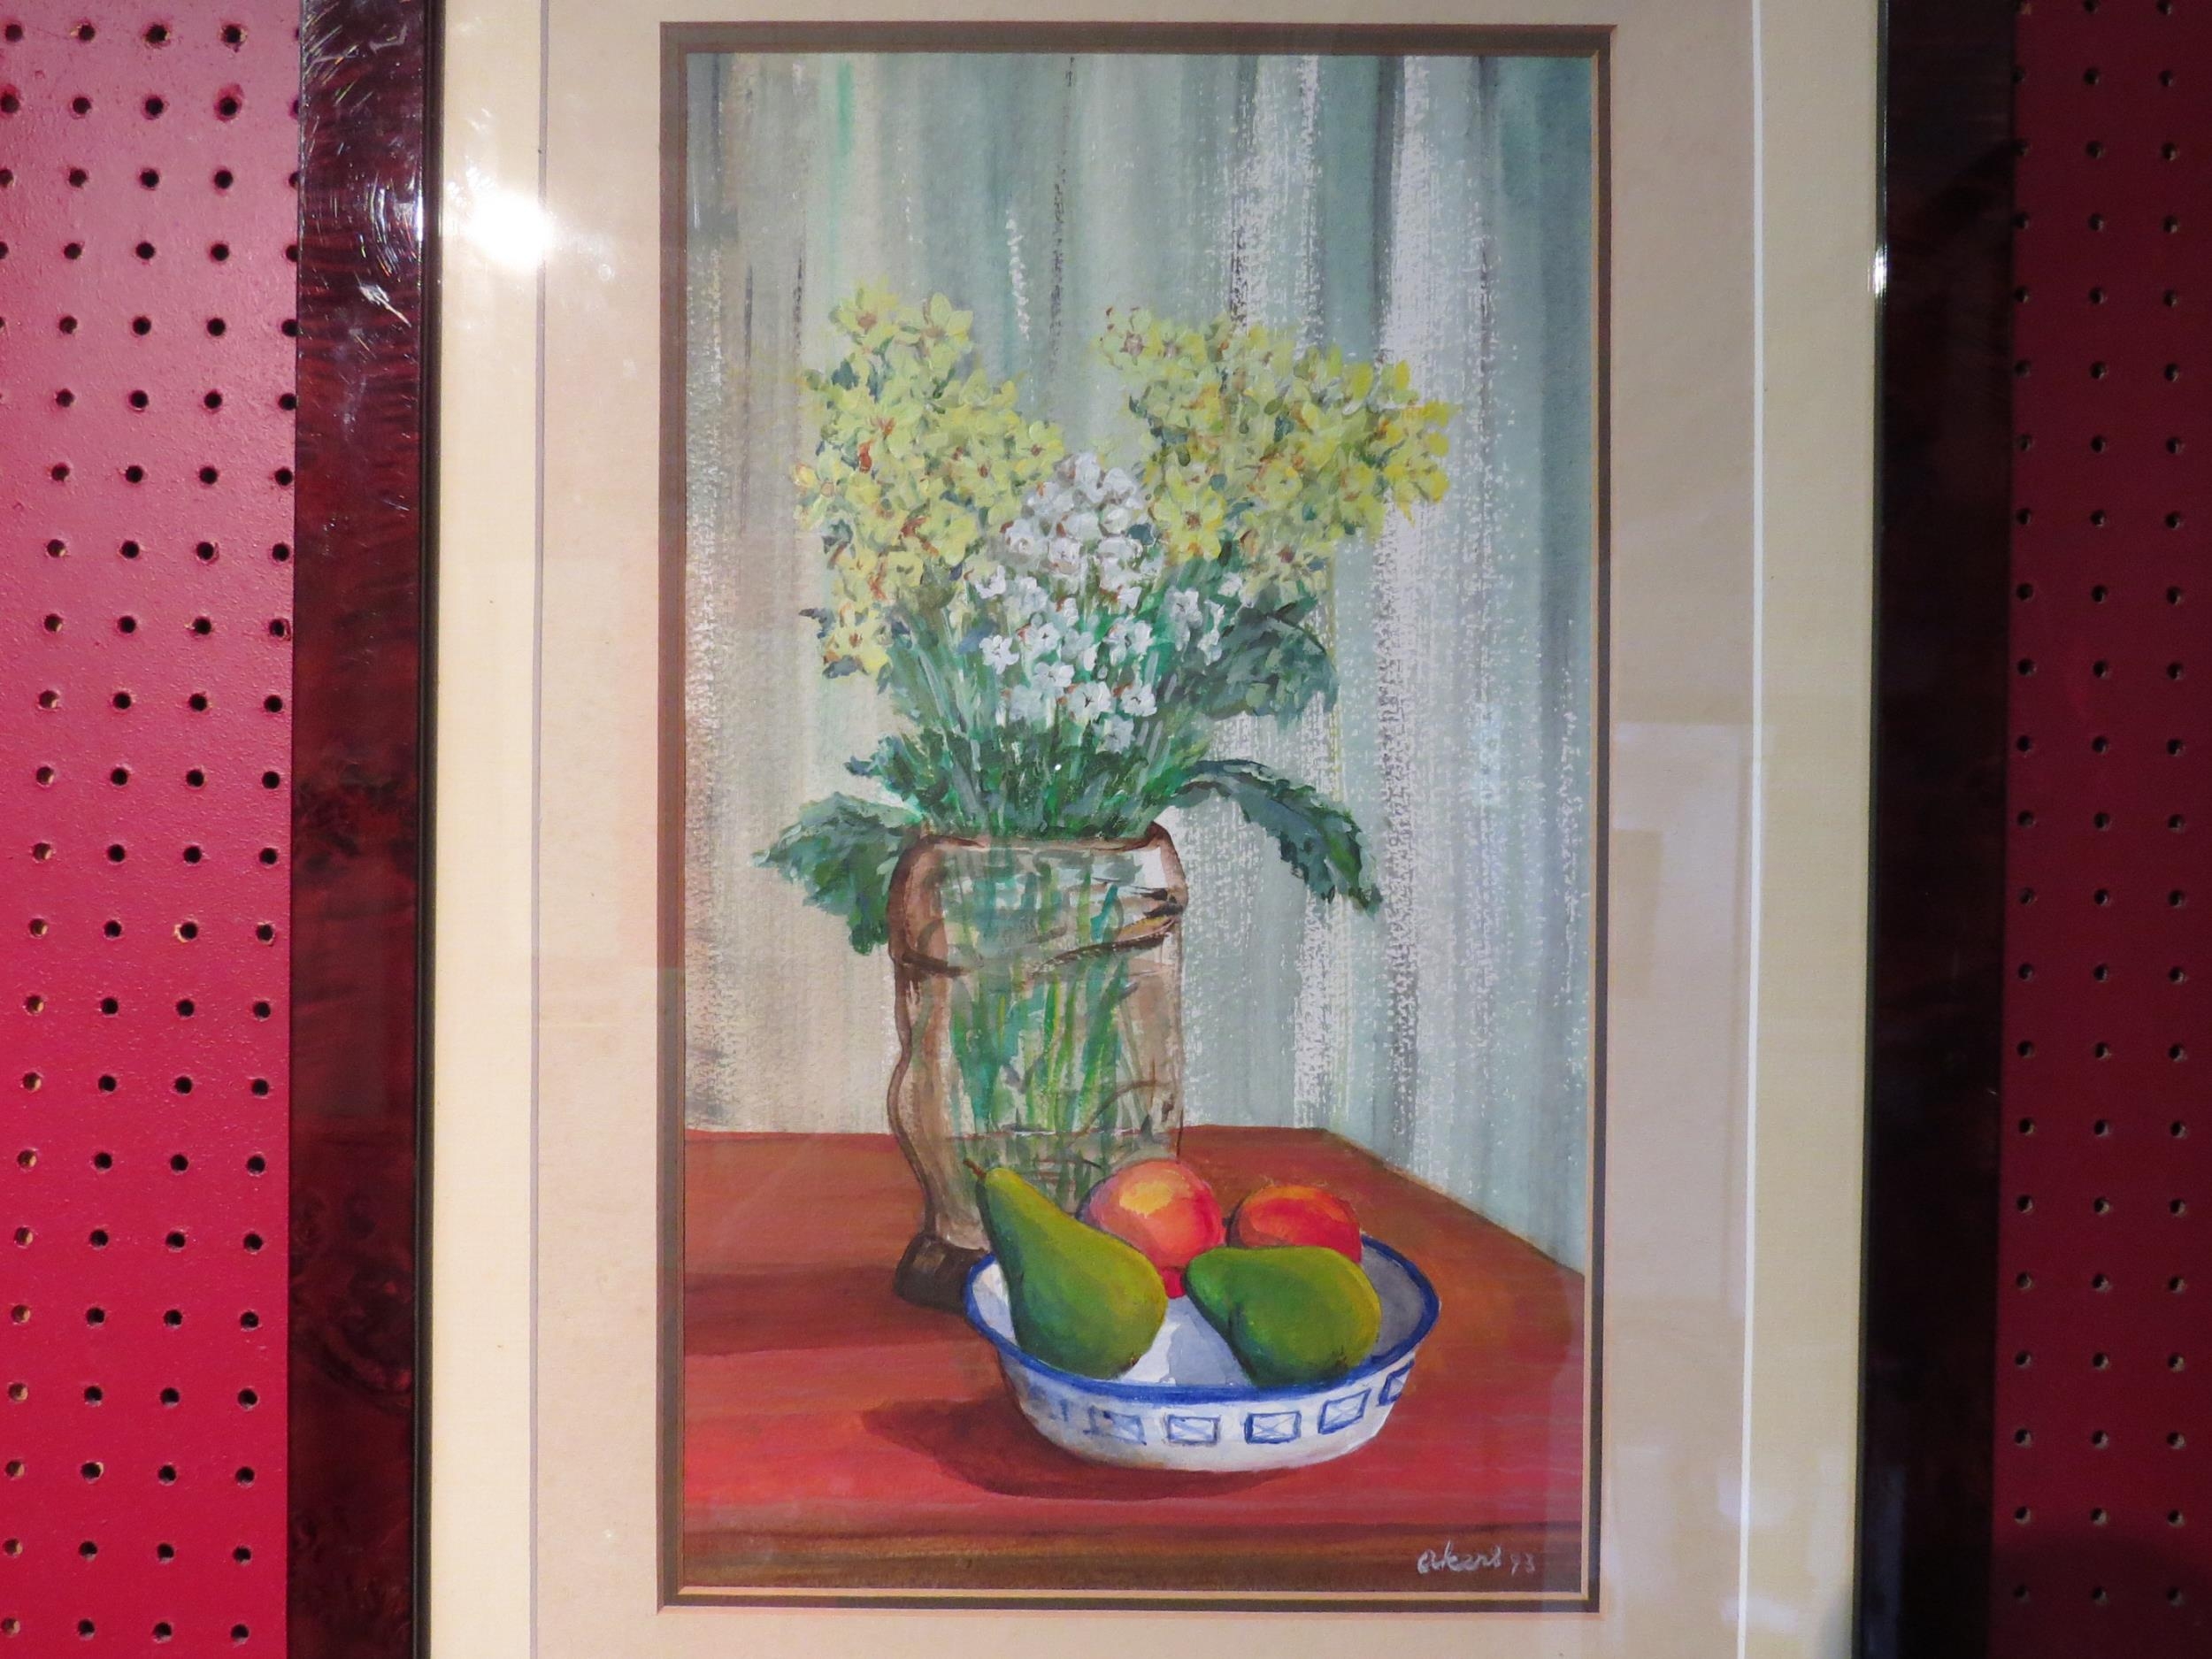 A watercolour of a vase with white and yellow flowers on a table and a bowl of fruit in the